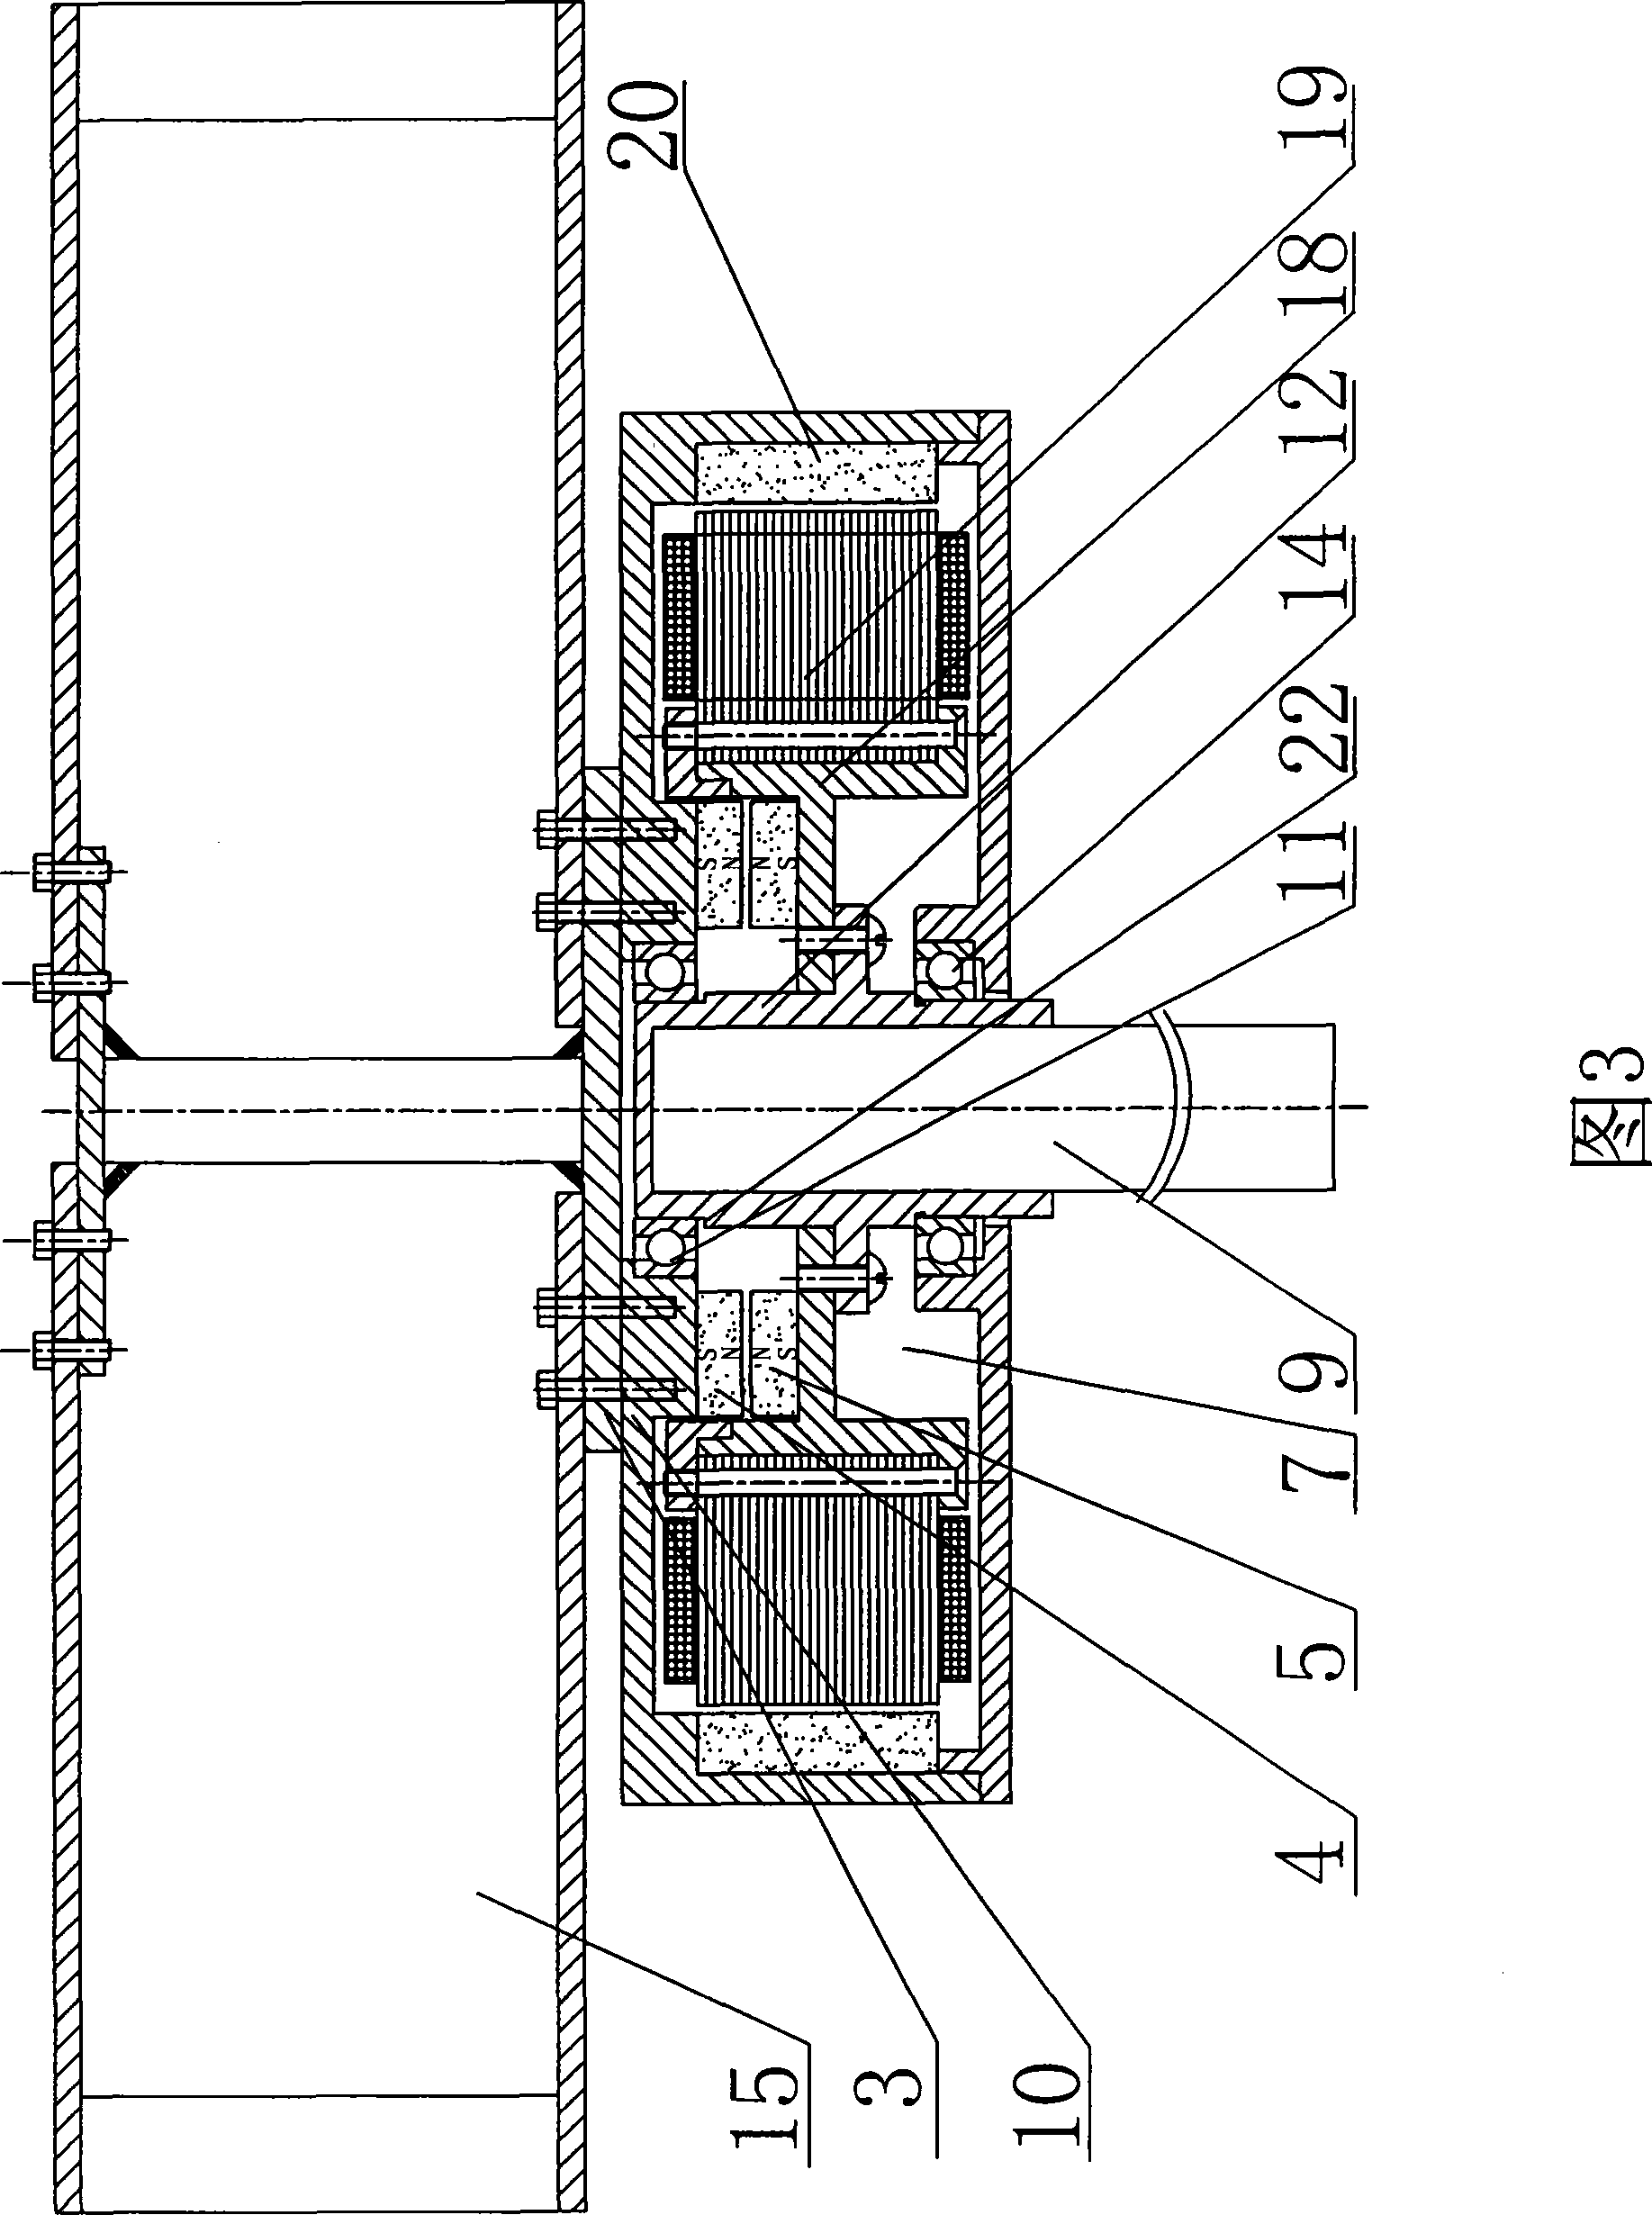 Vertical axis aerogenerator with magnetic suspension for reducing gravity force and frictional force